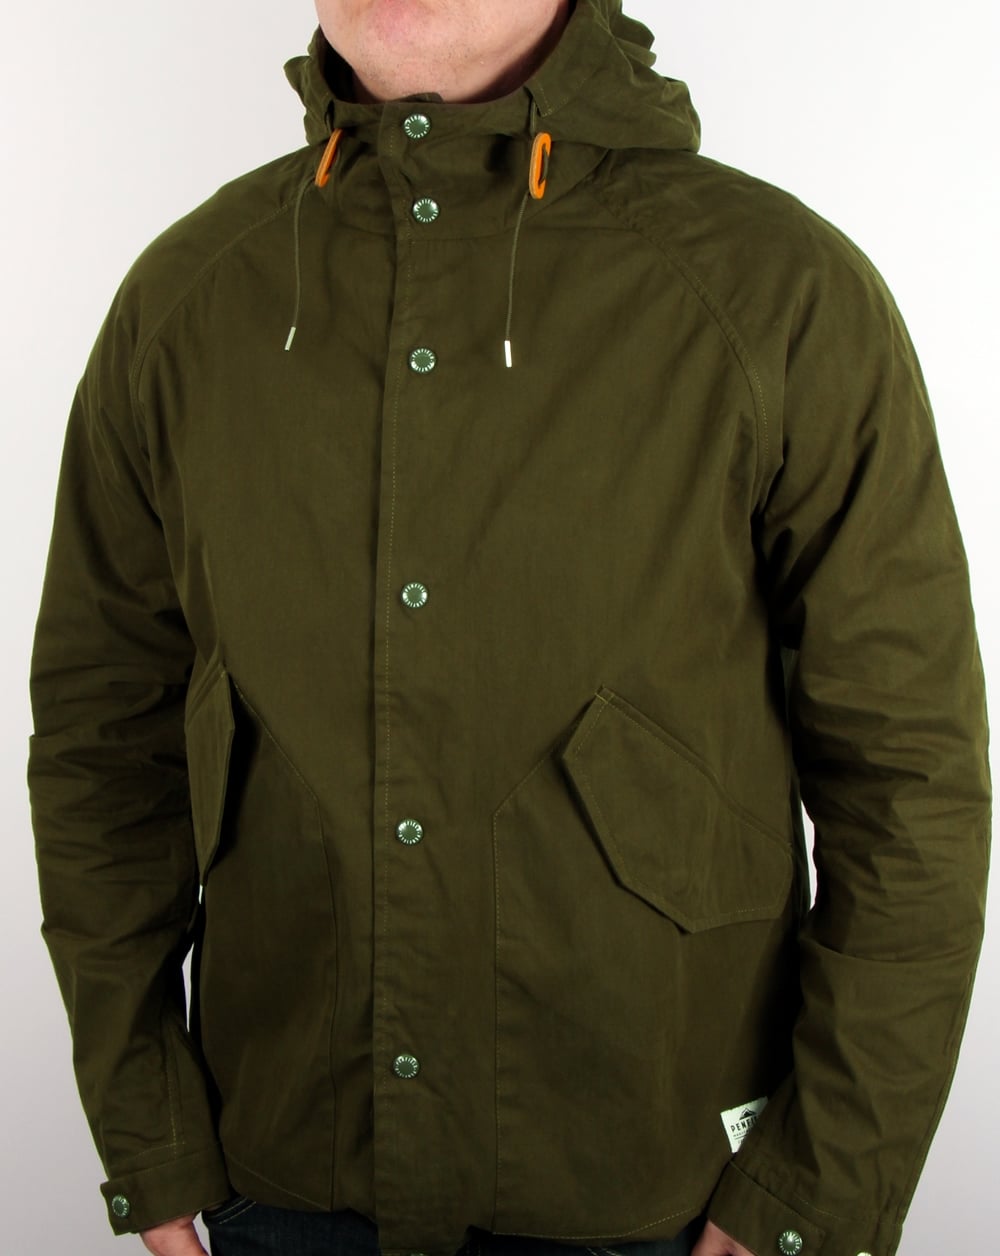 Penfield Jacket: The Perfect Jacket For You – StyleSkier.com